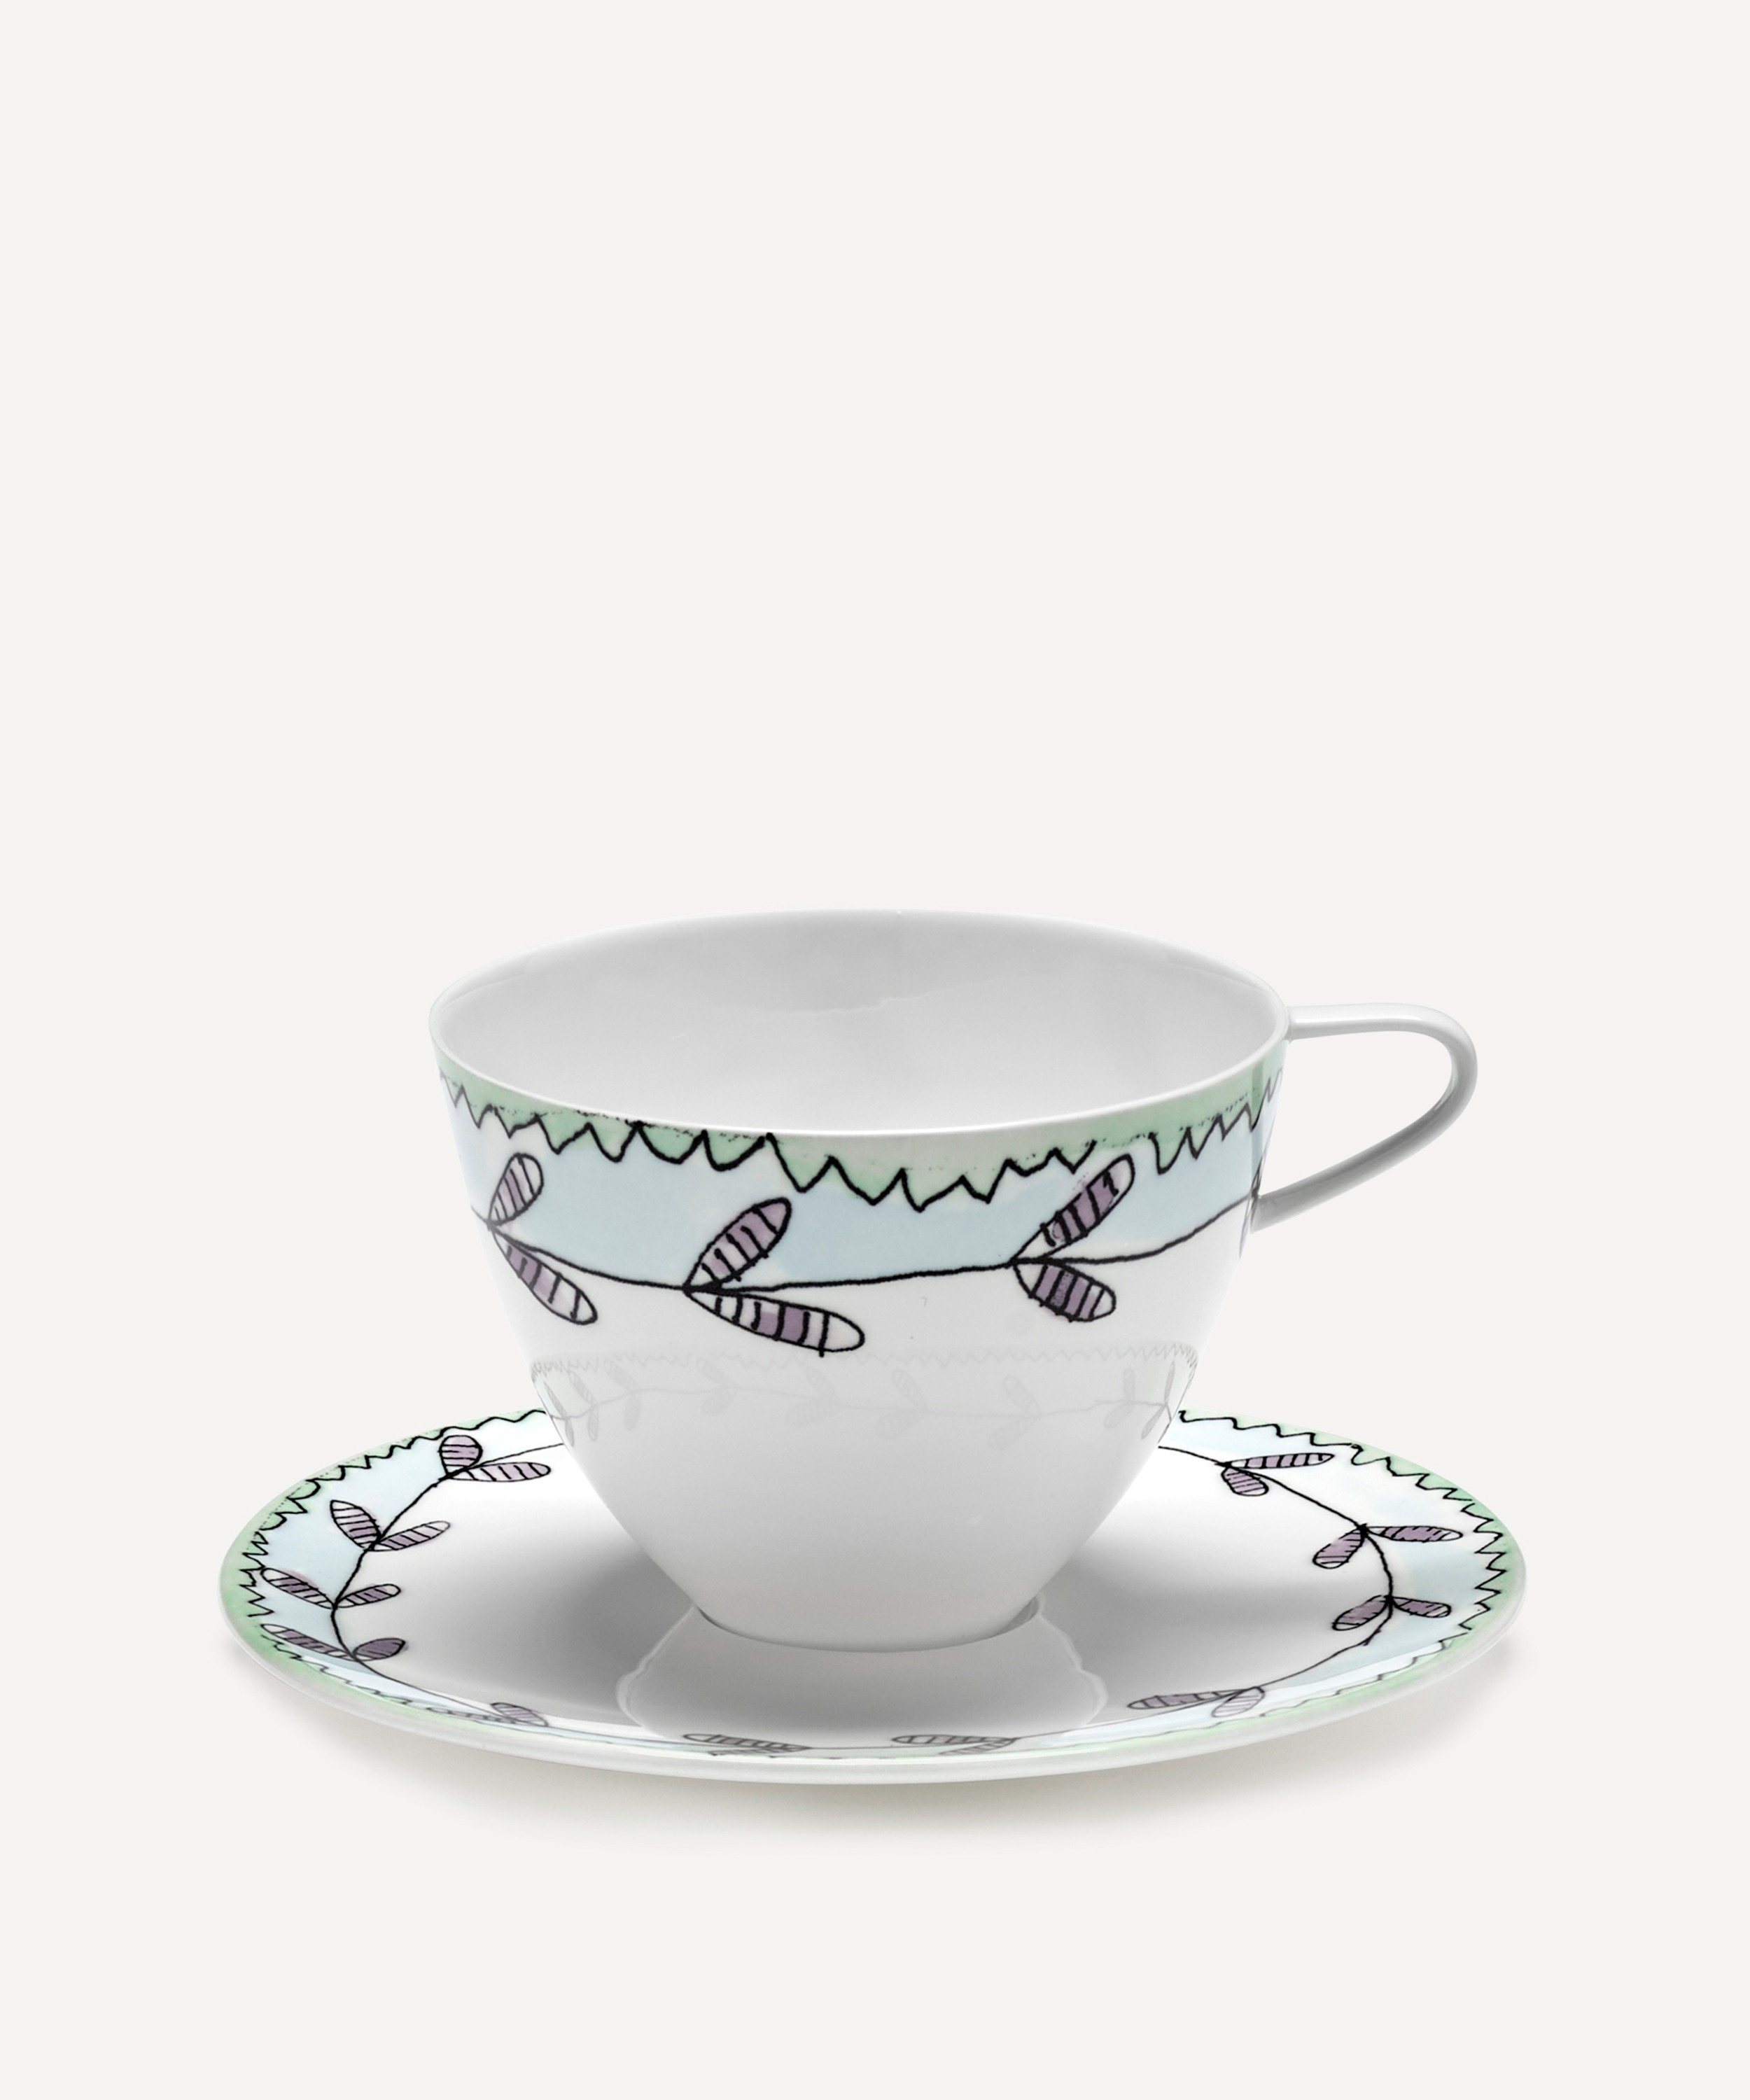 X Marni Anemone Milk Set Of 2 Cappuccino Cups And Saucers in Multicoloured  - Serax